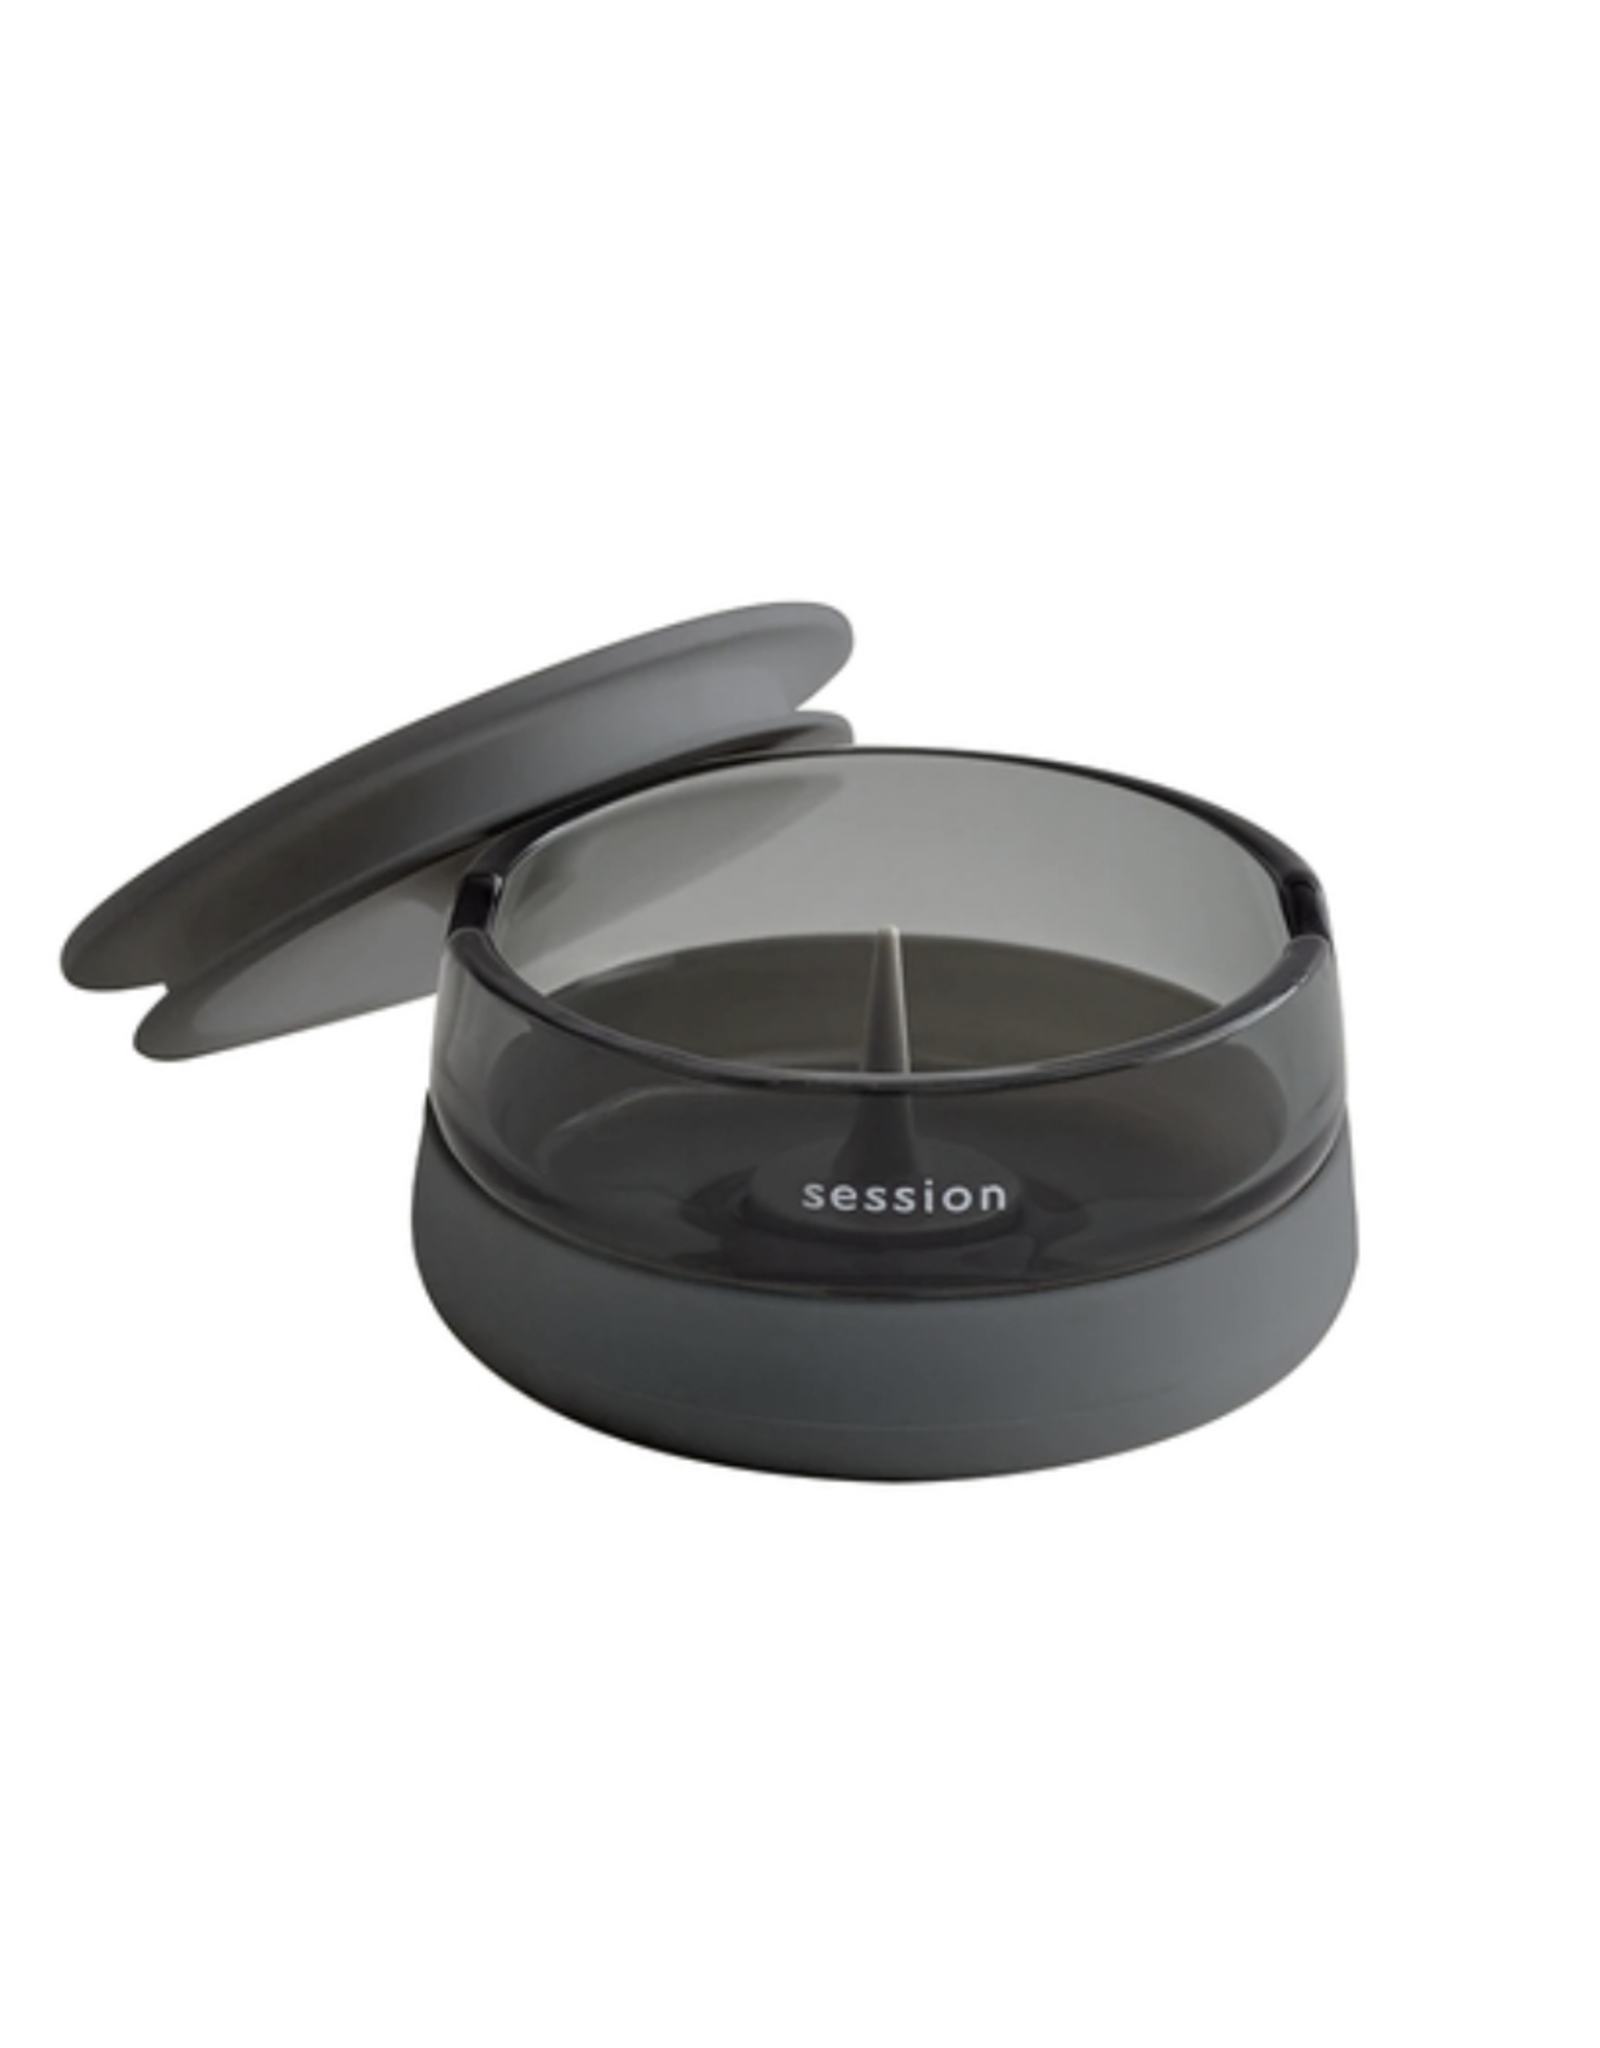 Session Goods Ashtray - Charcoal